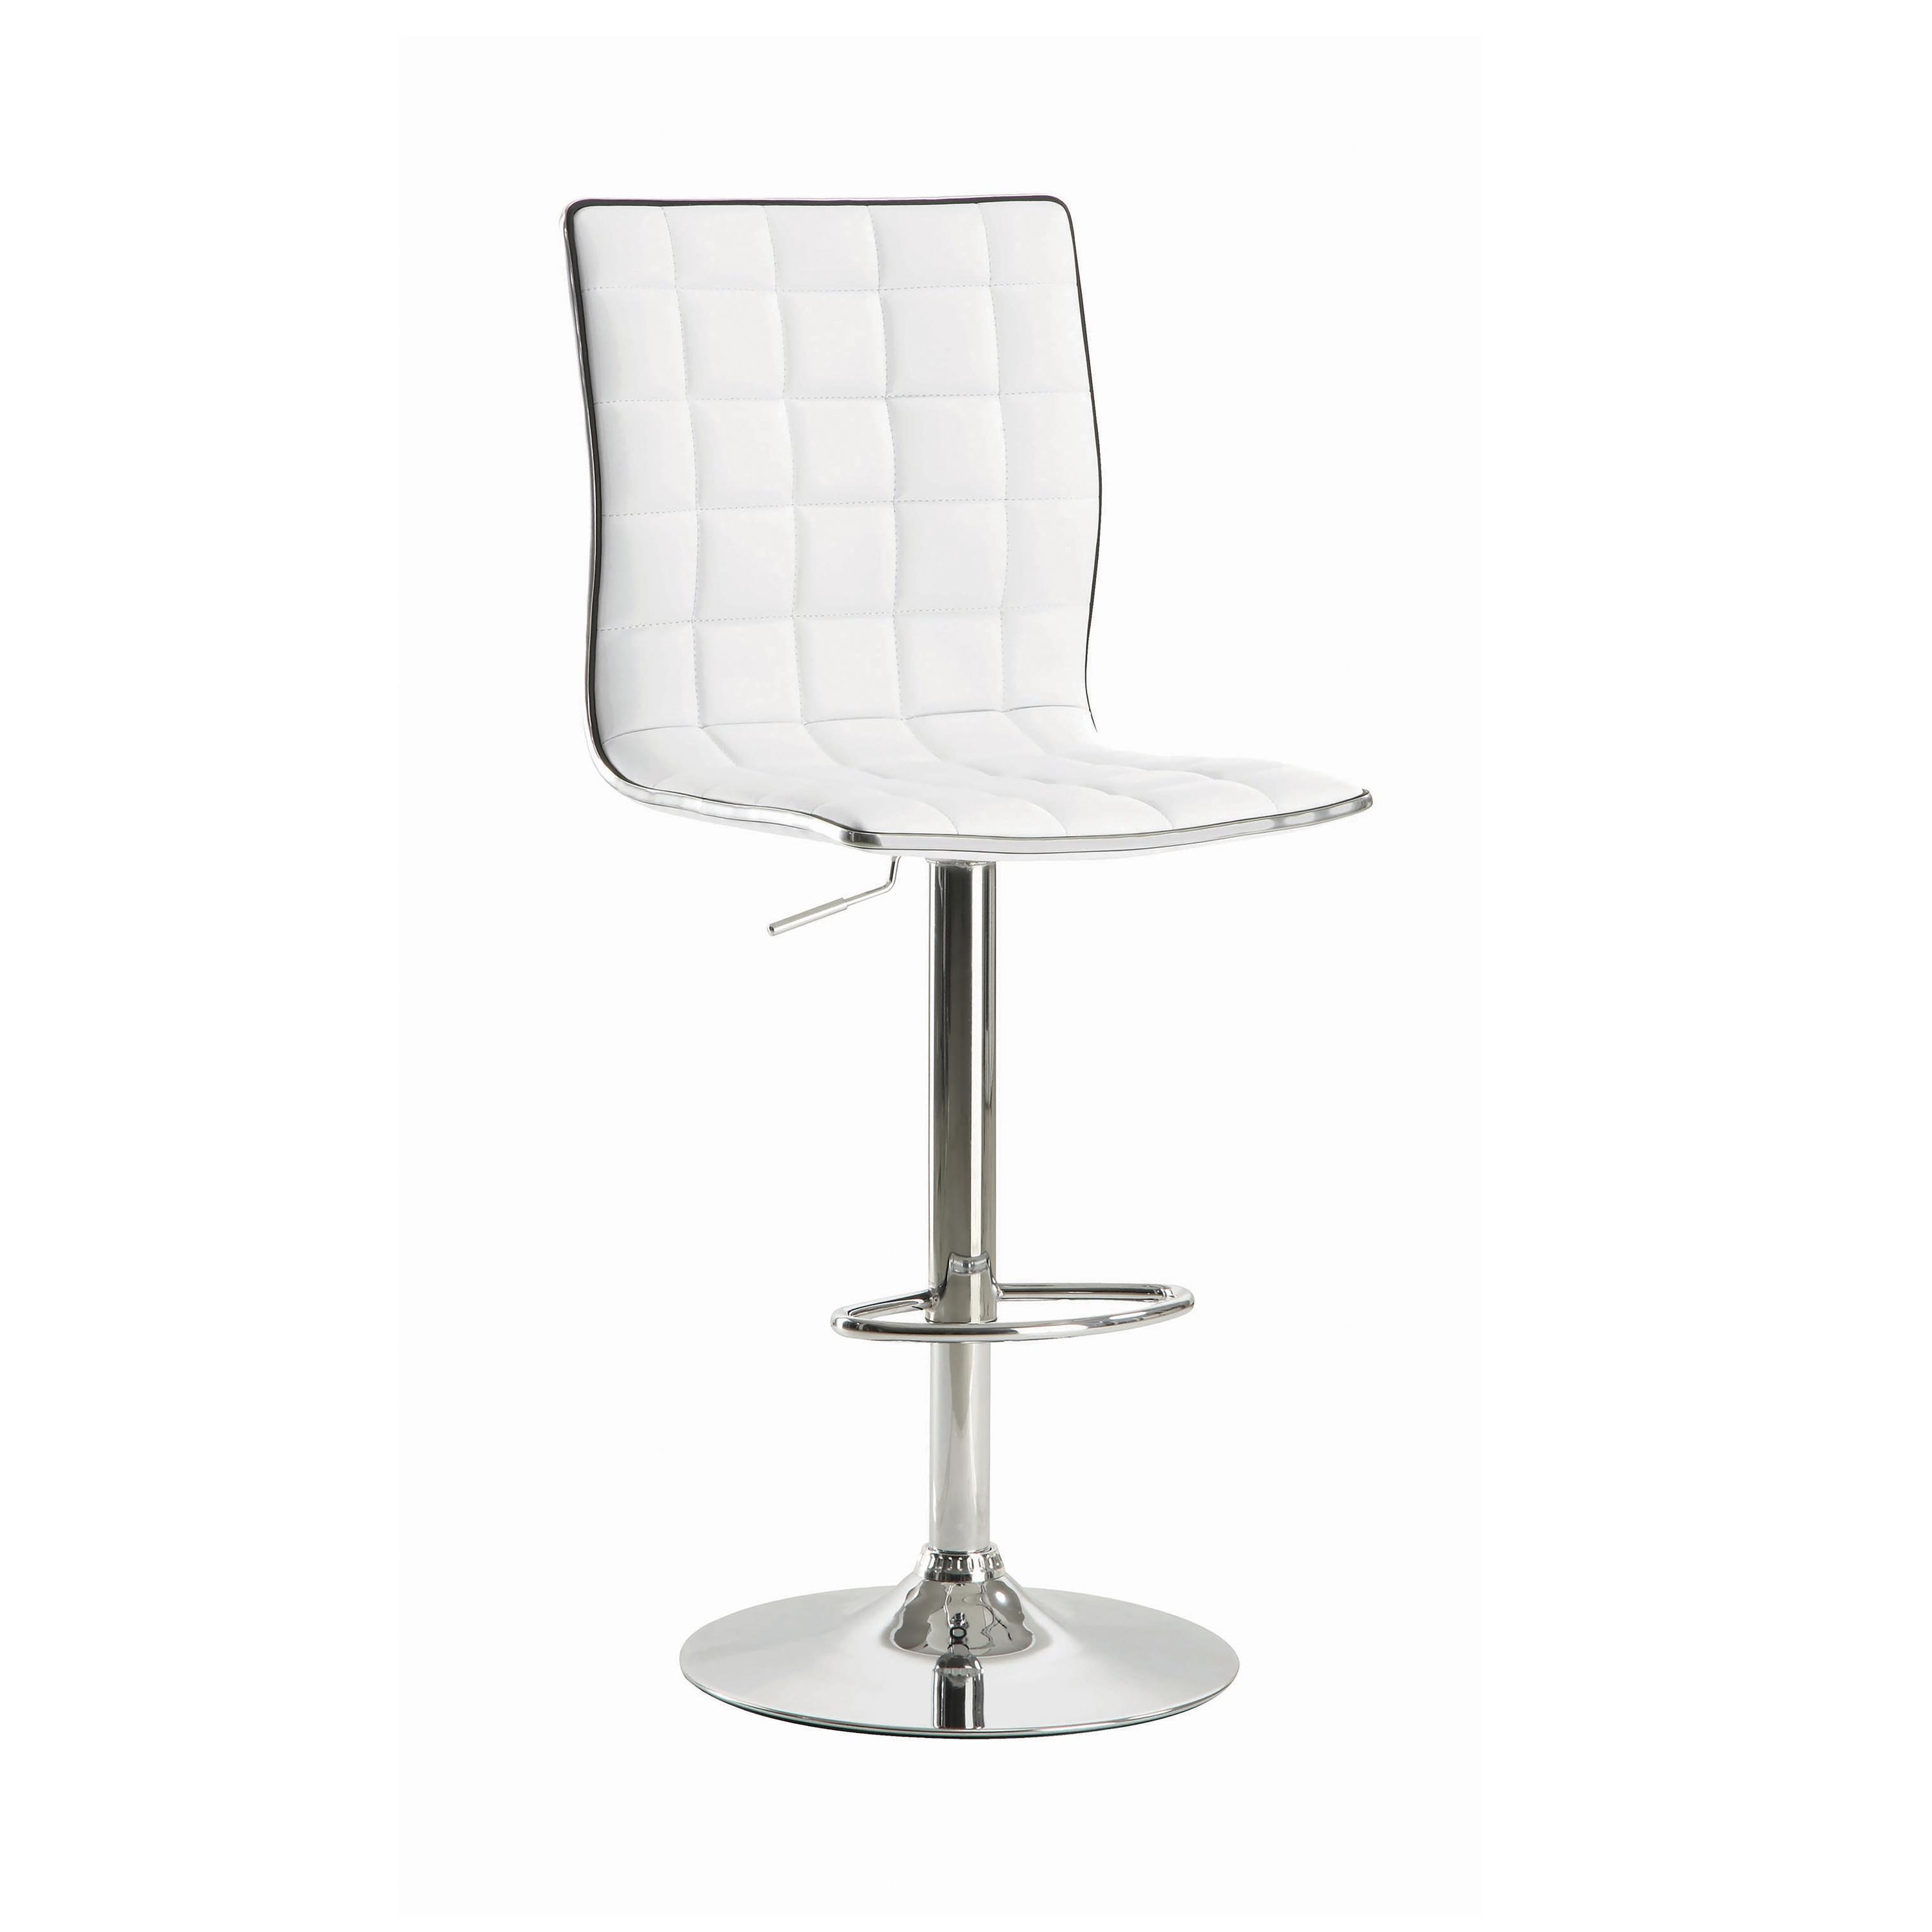 Contemporary Bar Stool Set 122089 122089 in White Leatherette